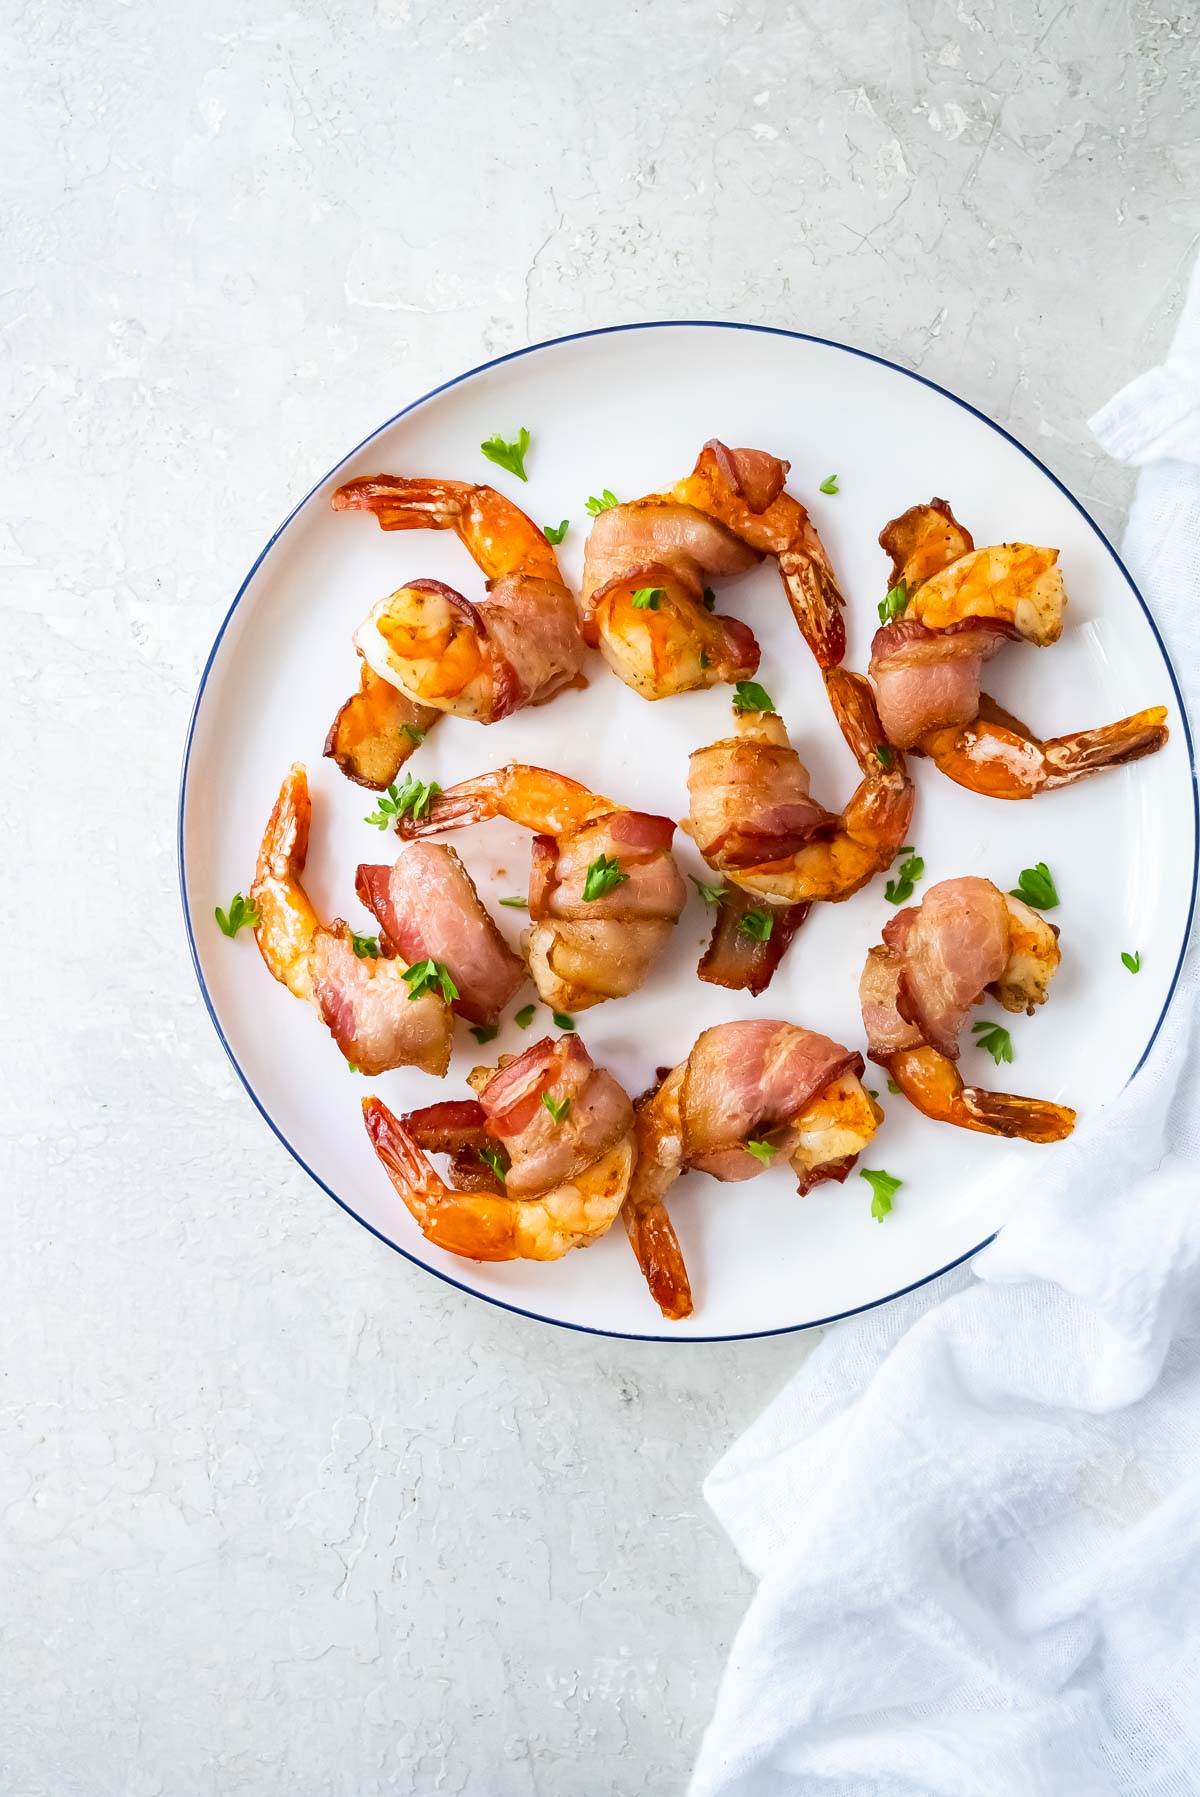 the completed bacon wrapped shrimp air fryer recipe ready to serve on a white plate with cloth napkin